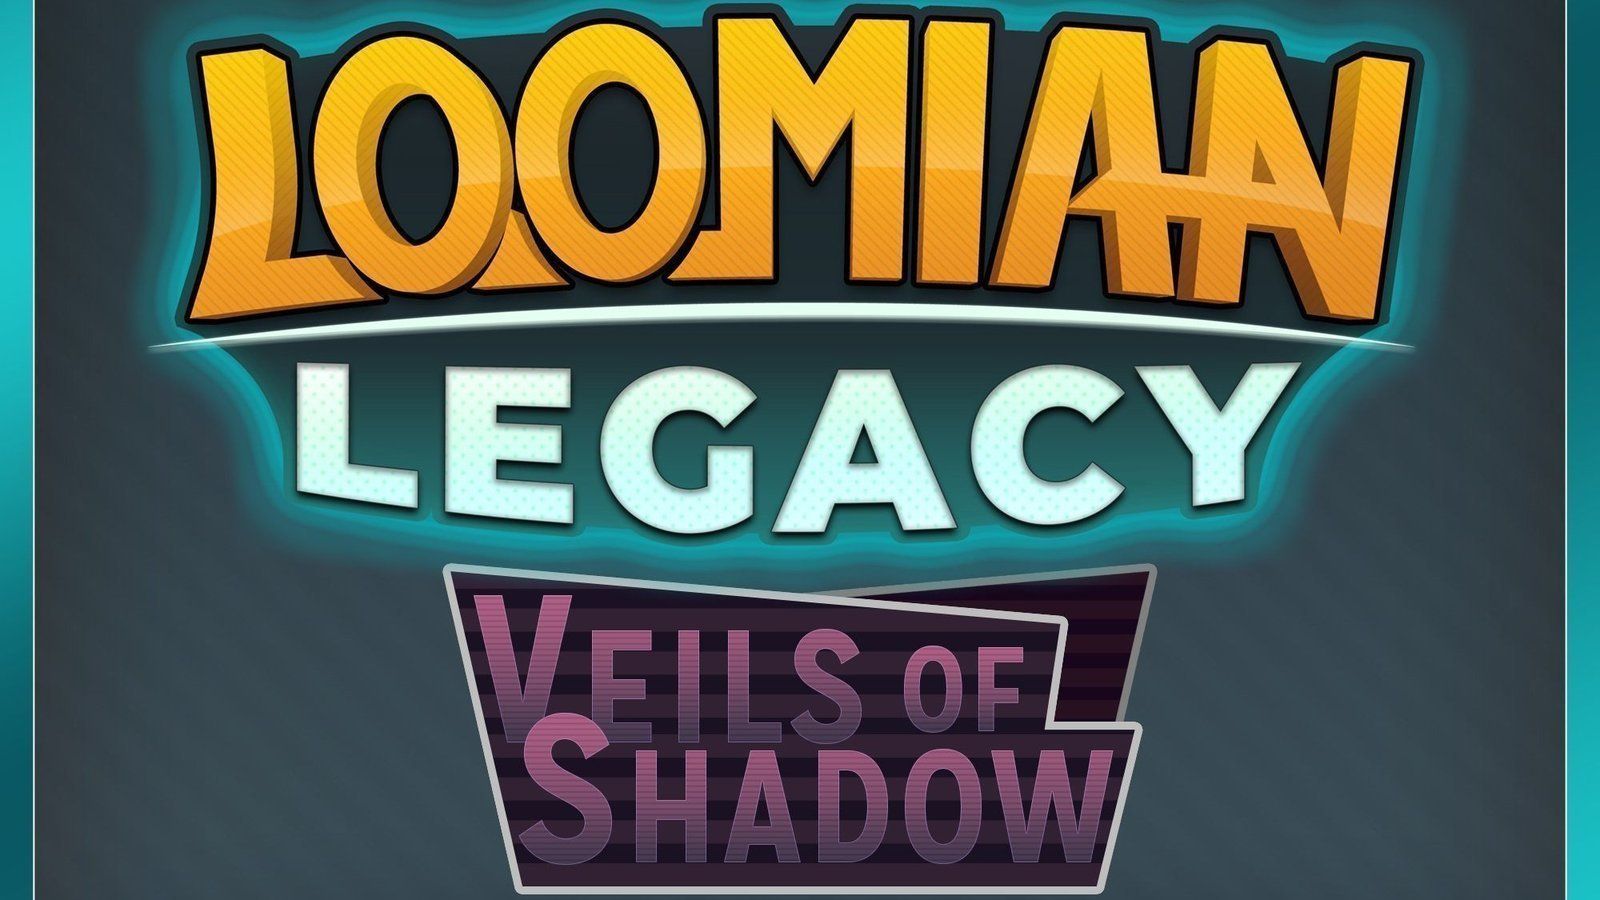 100+] Loomian Legacy Wallpapers